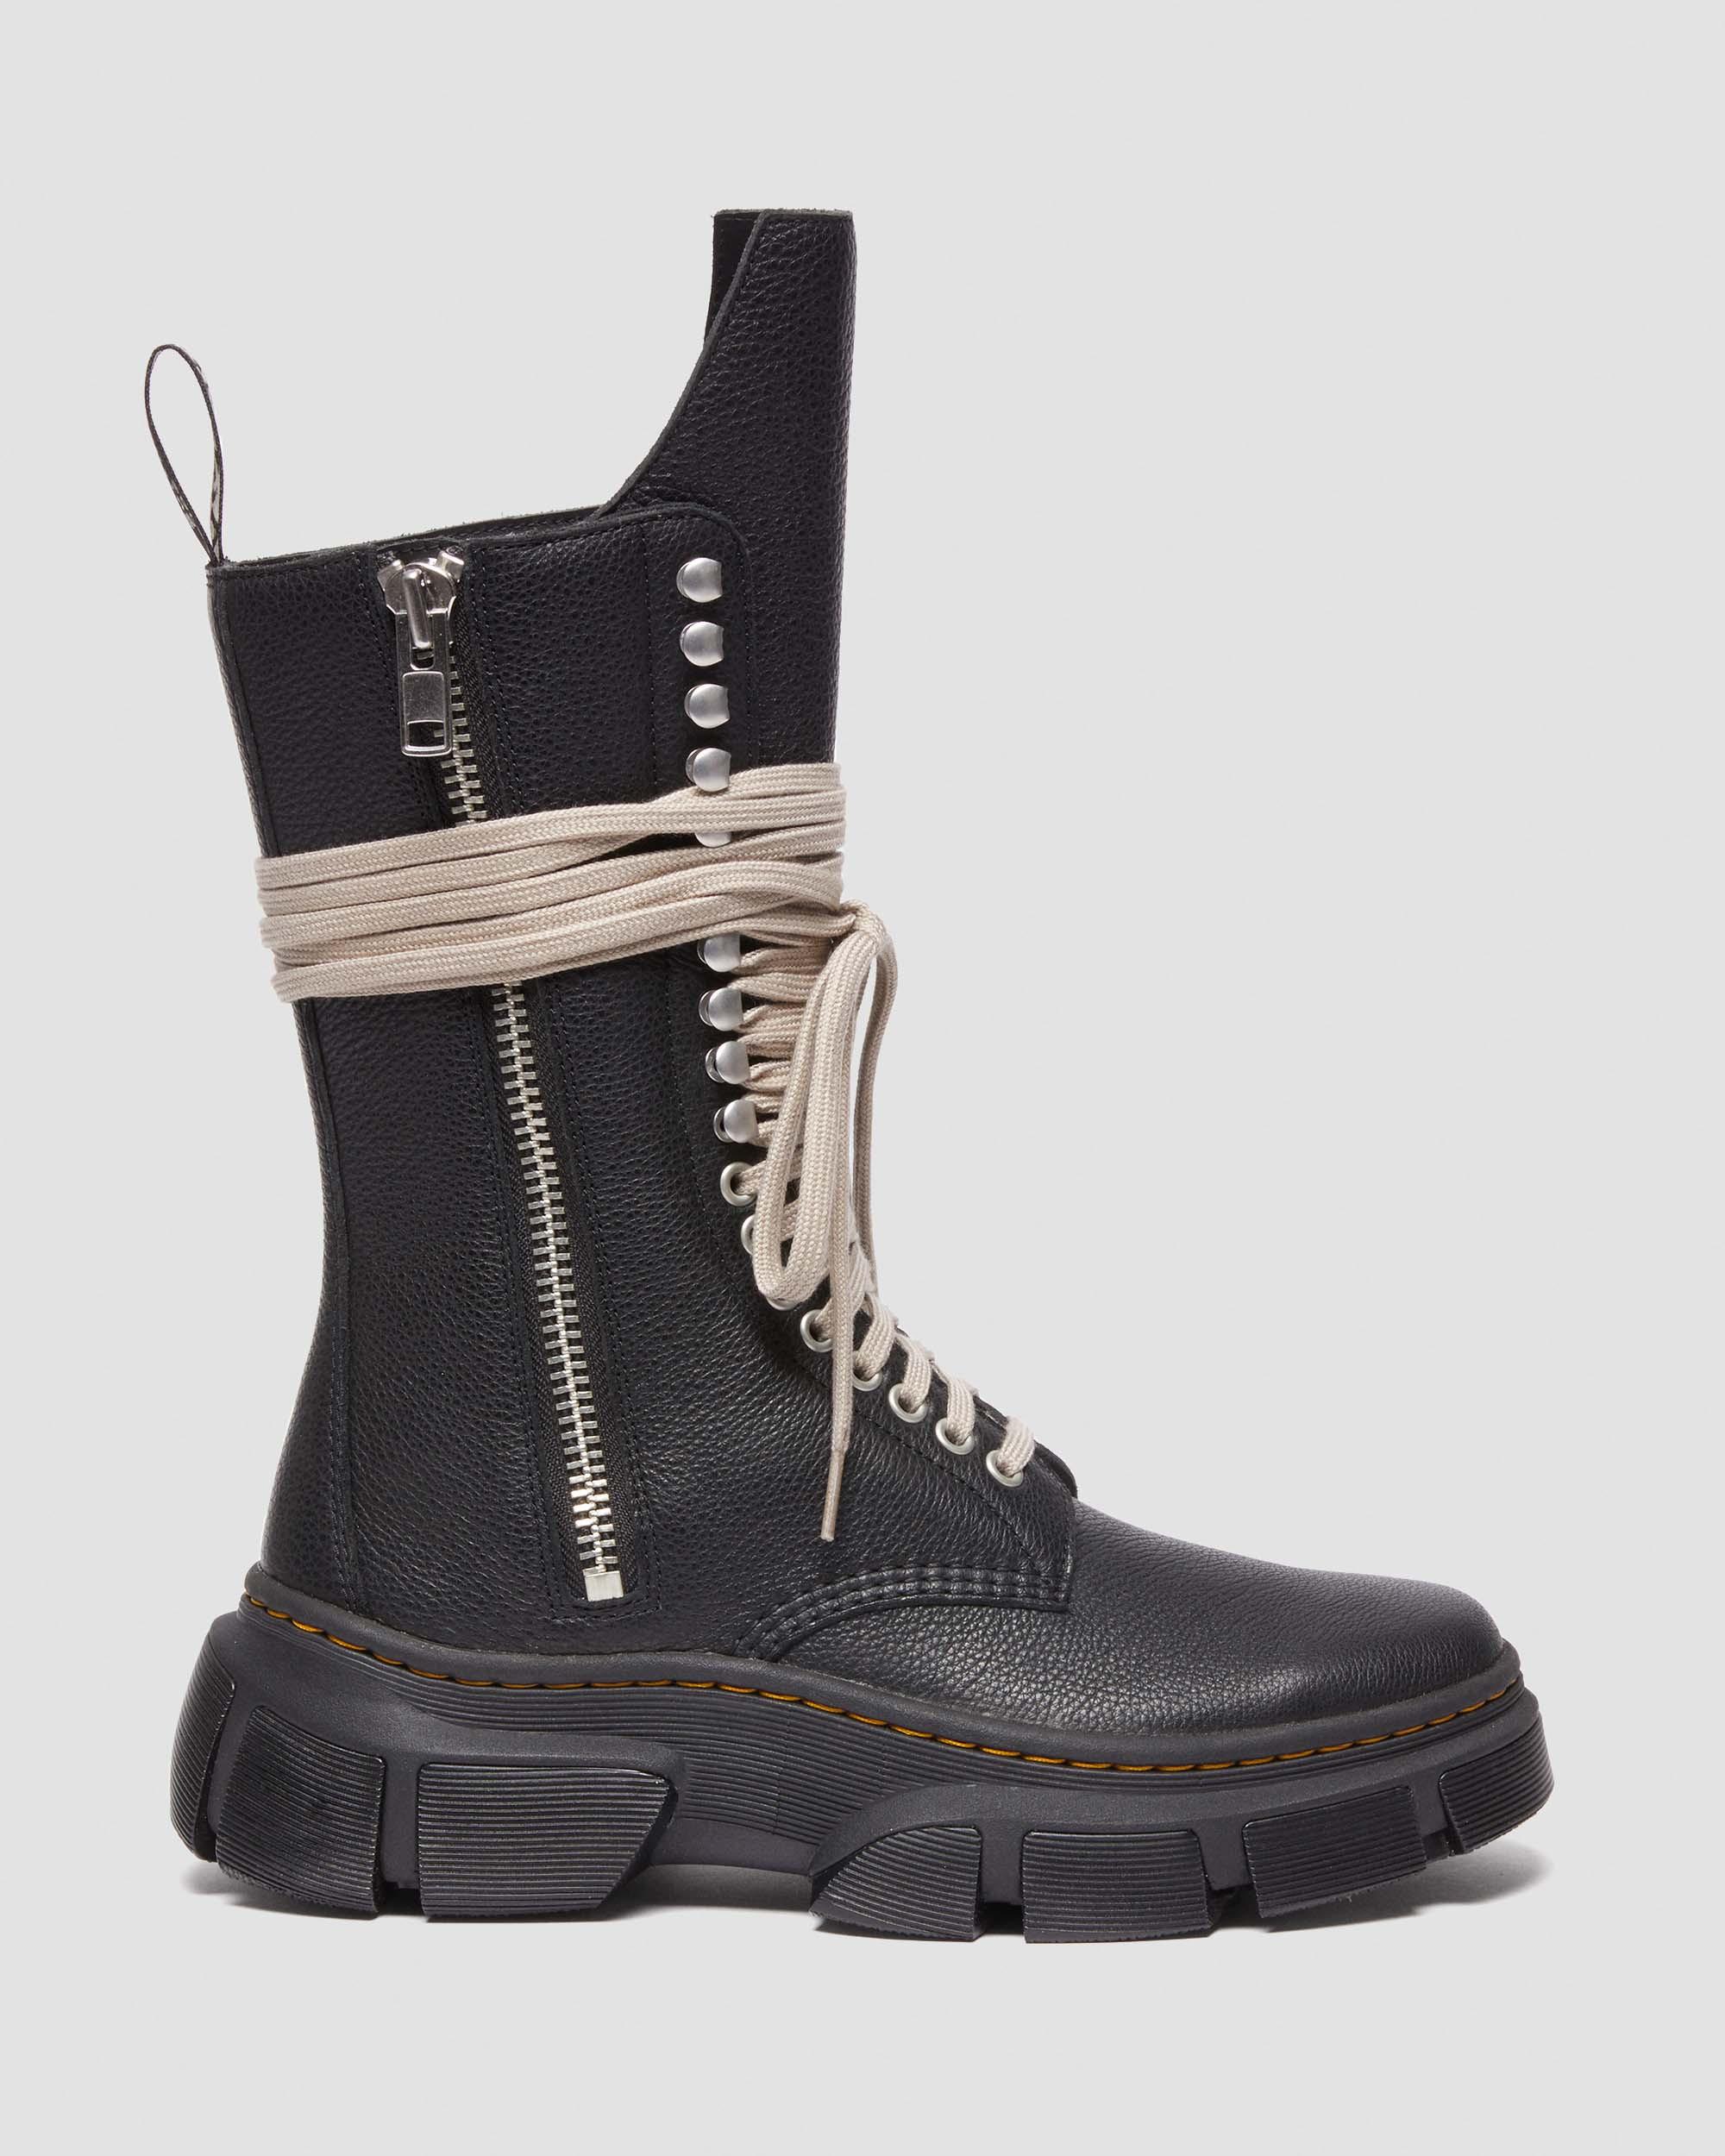 DR MARTENS 1918 Rick Owens DMXL Tall Leather Lace Up Boots